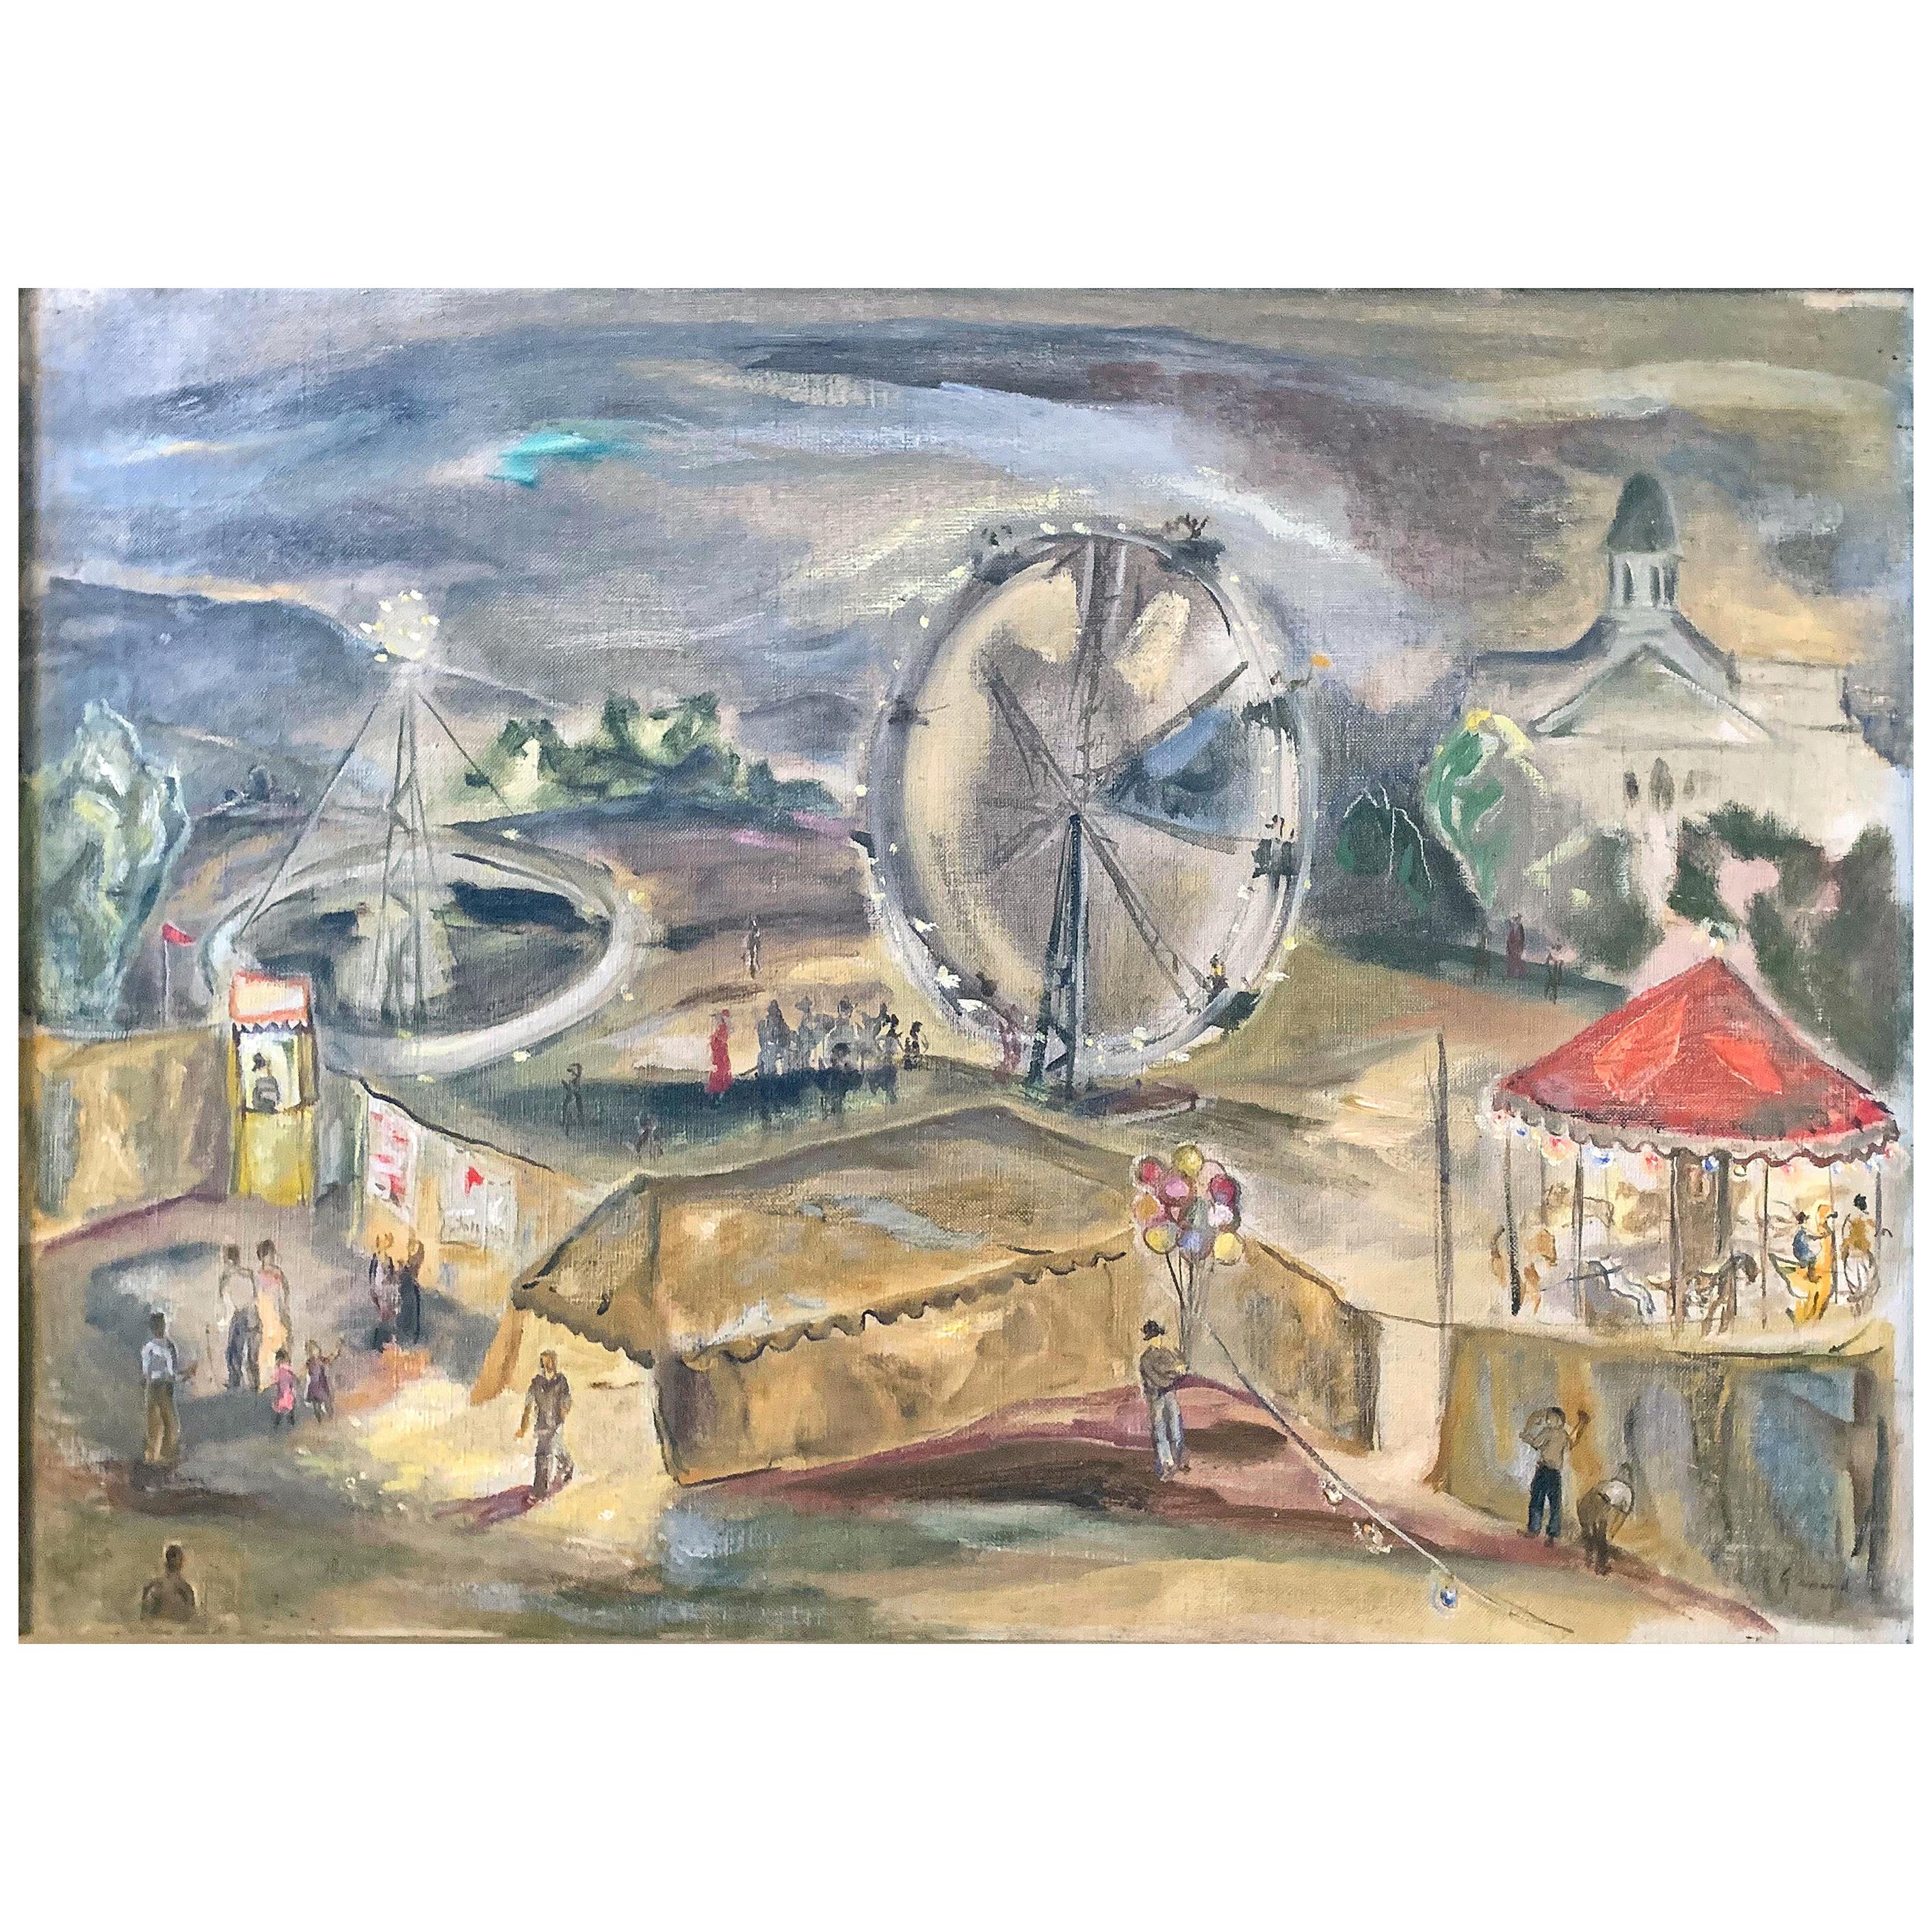 "Carnival in Manchester, " Atmospheric, WPA-Era Painting with Carousel by Gernand